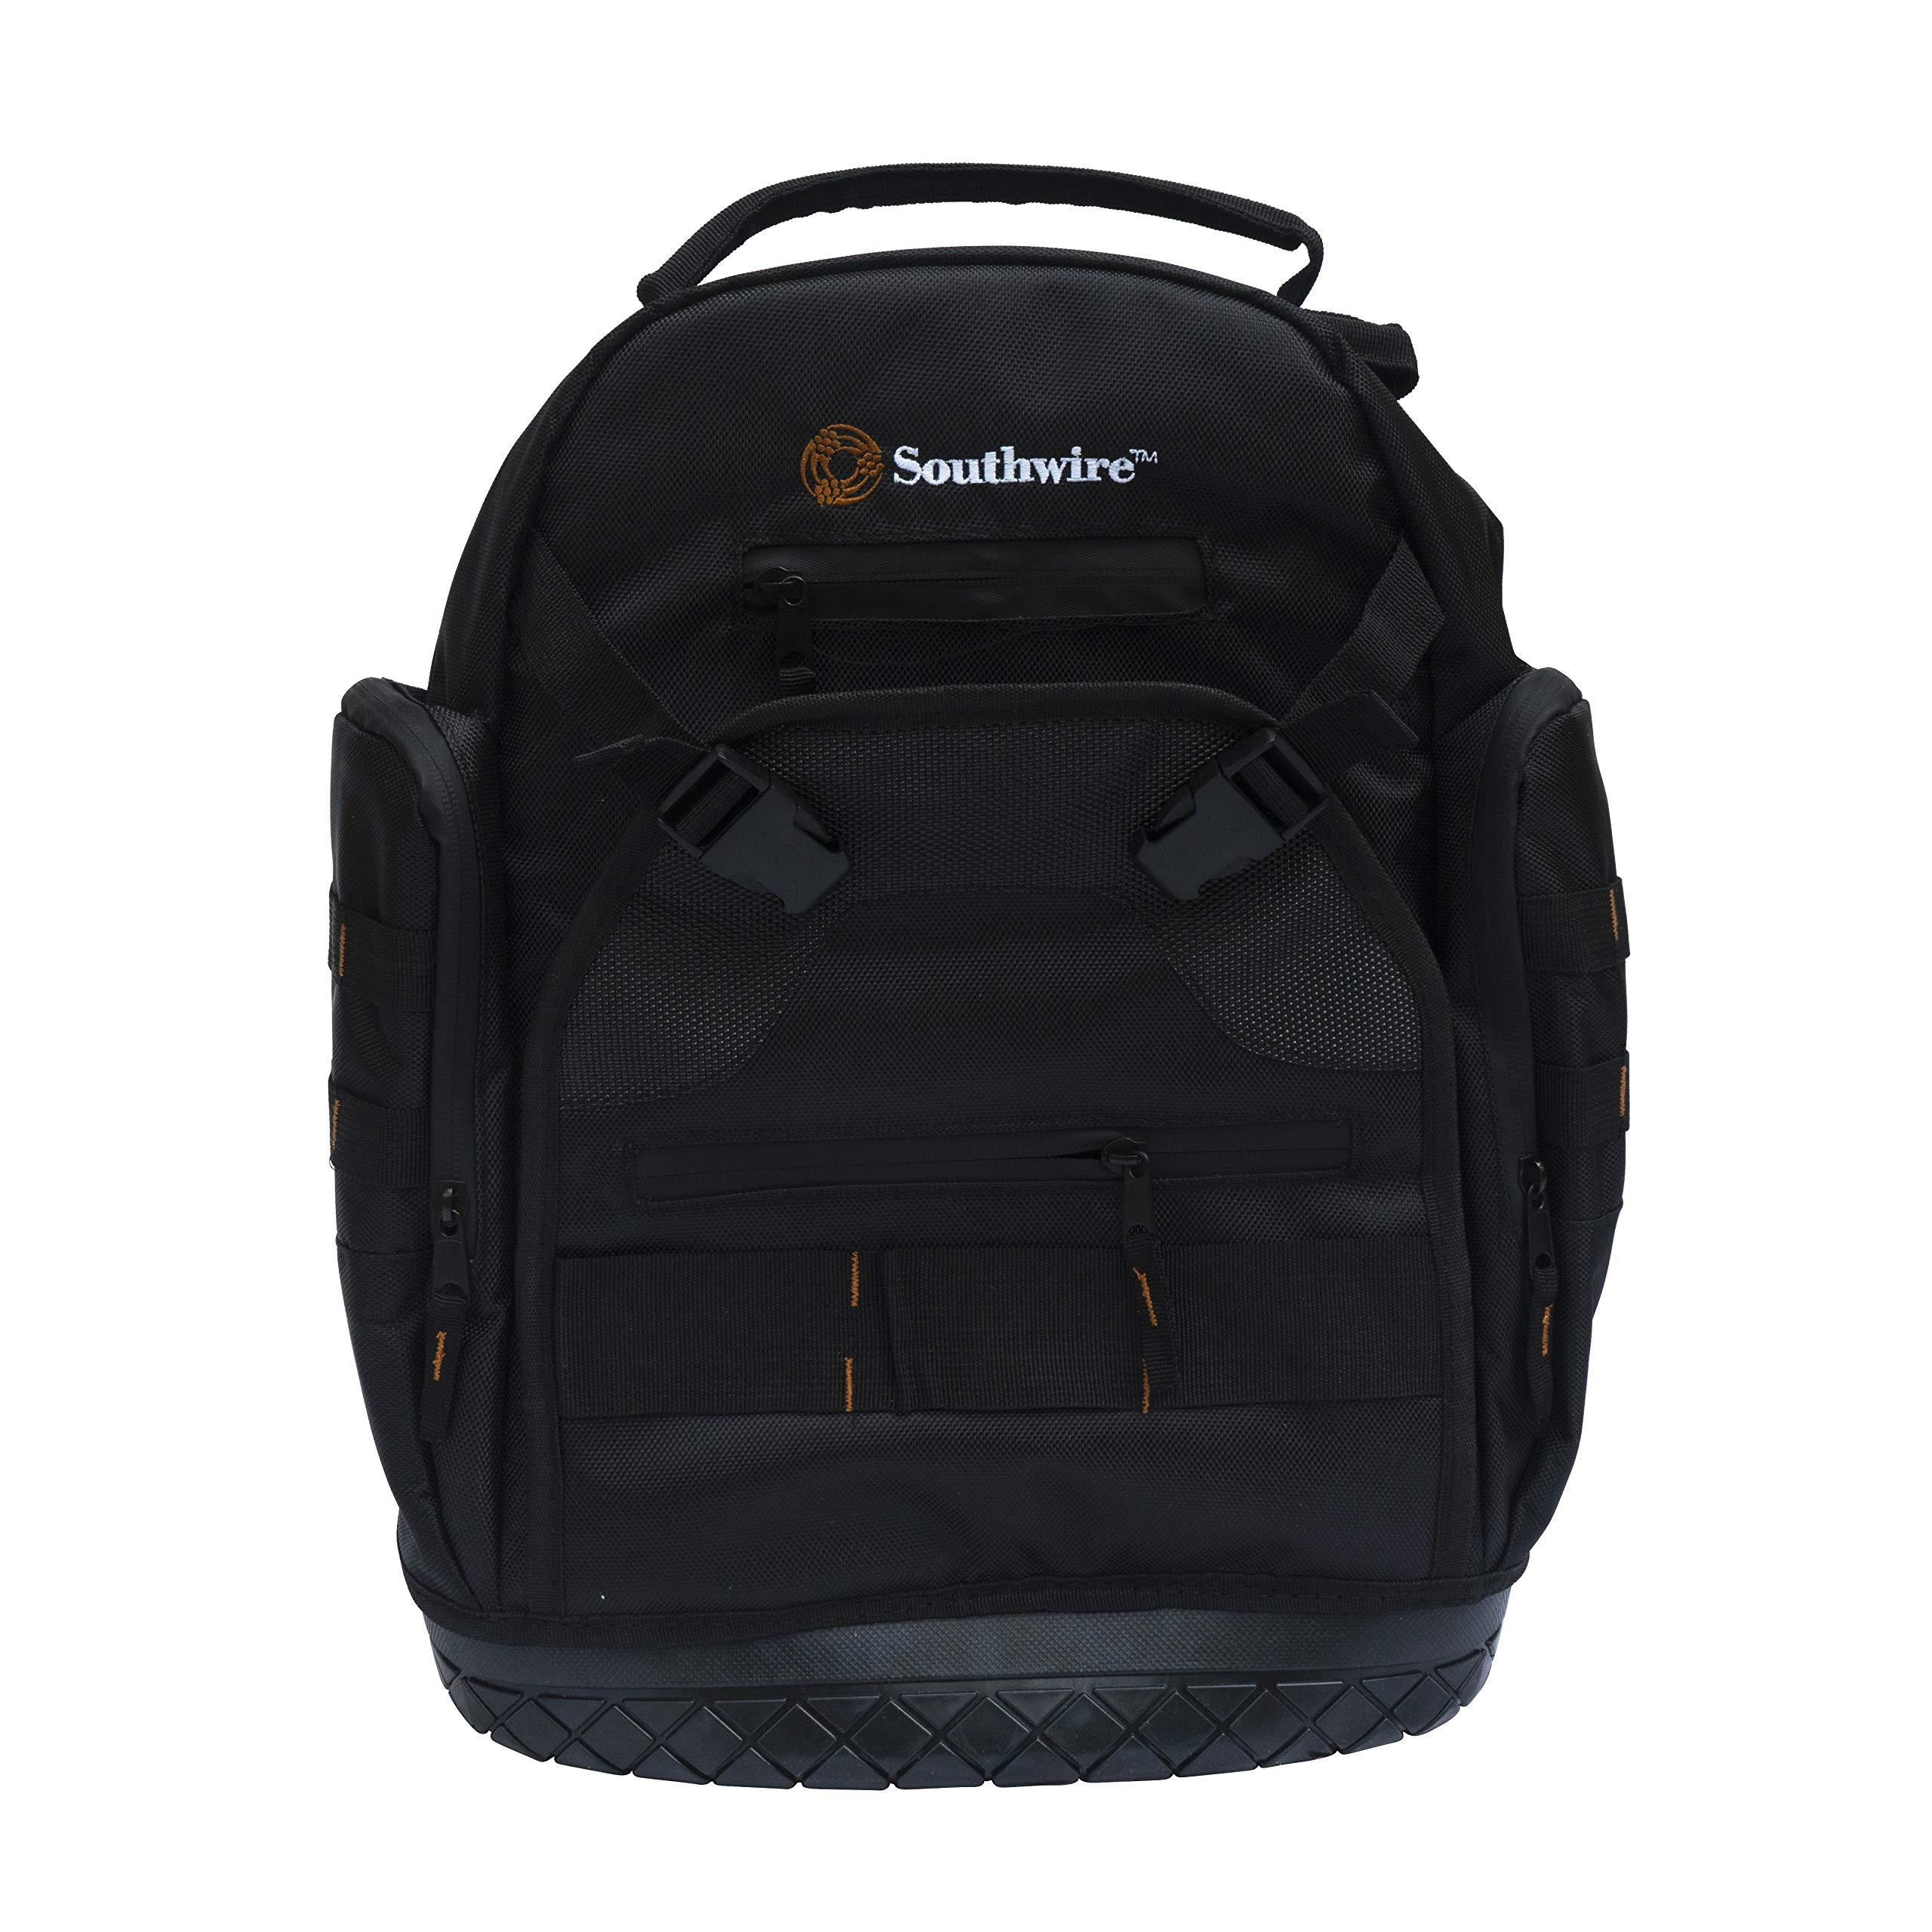 PROBAGBP  TOOL BACKPACK